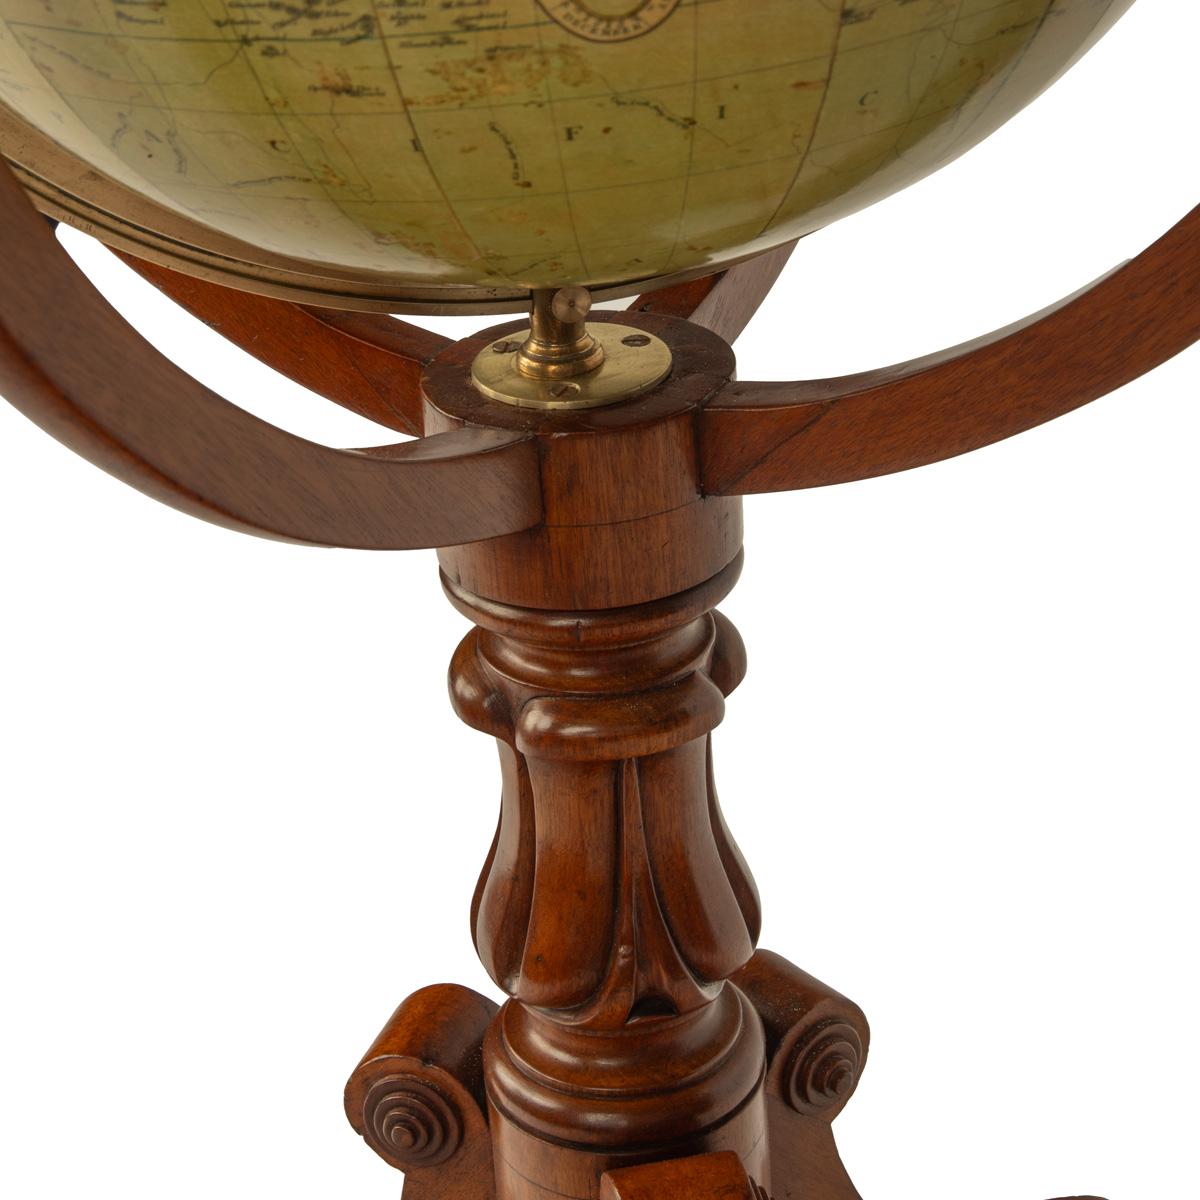 A Cary’s 15 inch terrestrial globe 1849 For Sale 1